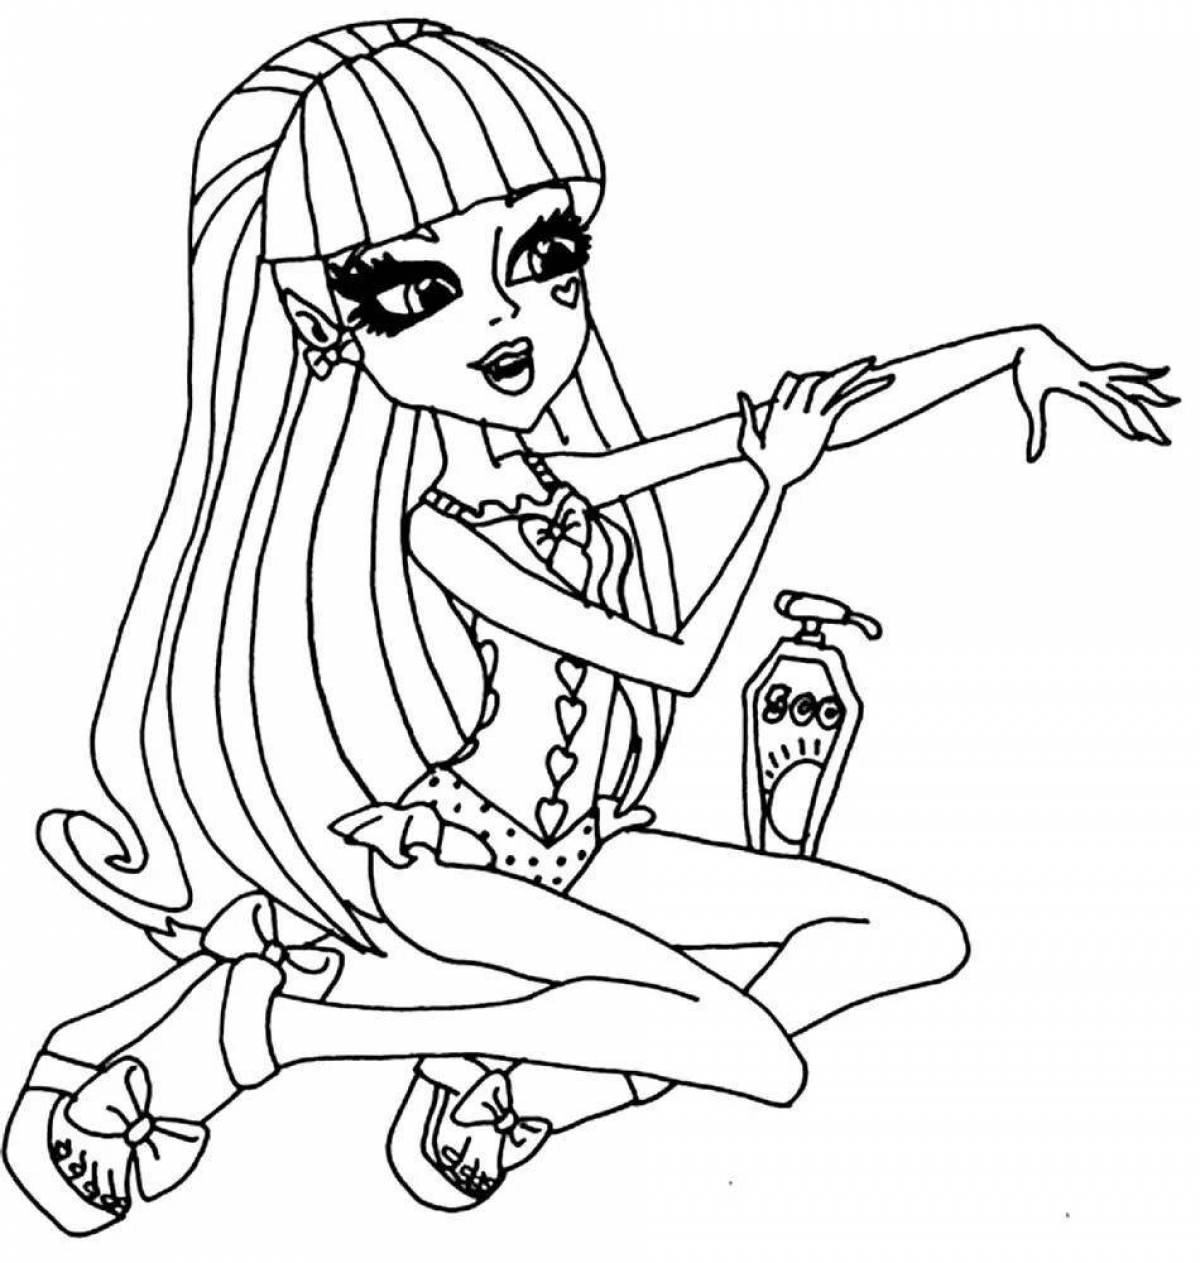 Exquisite monster high coloring book